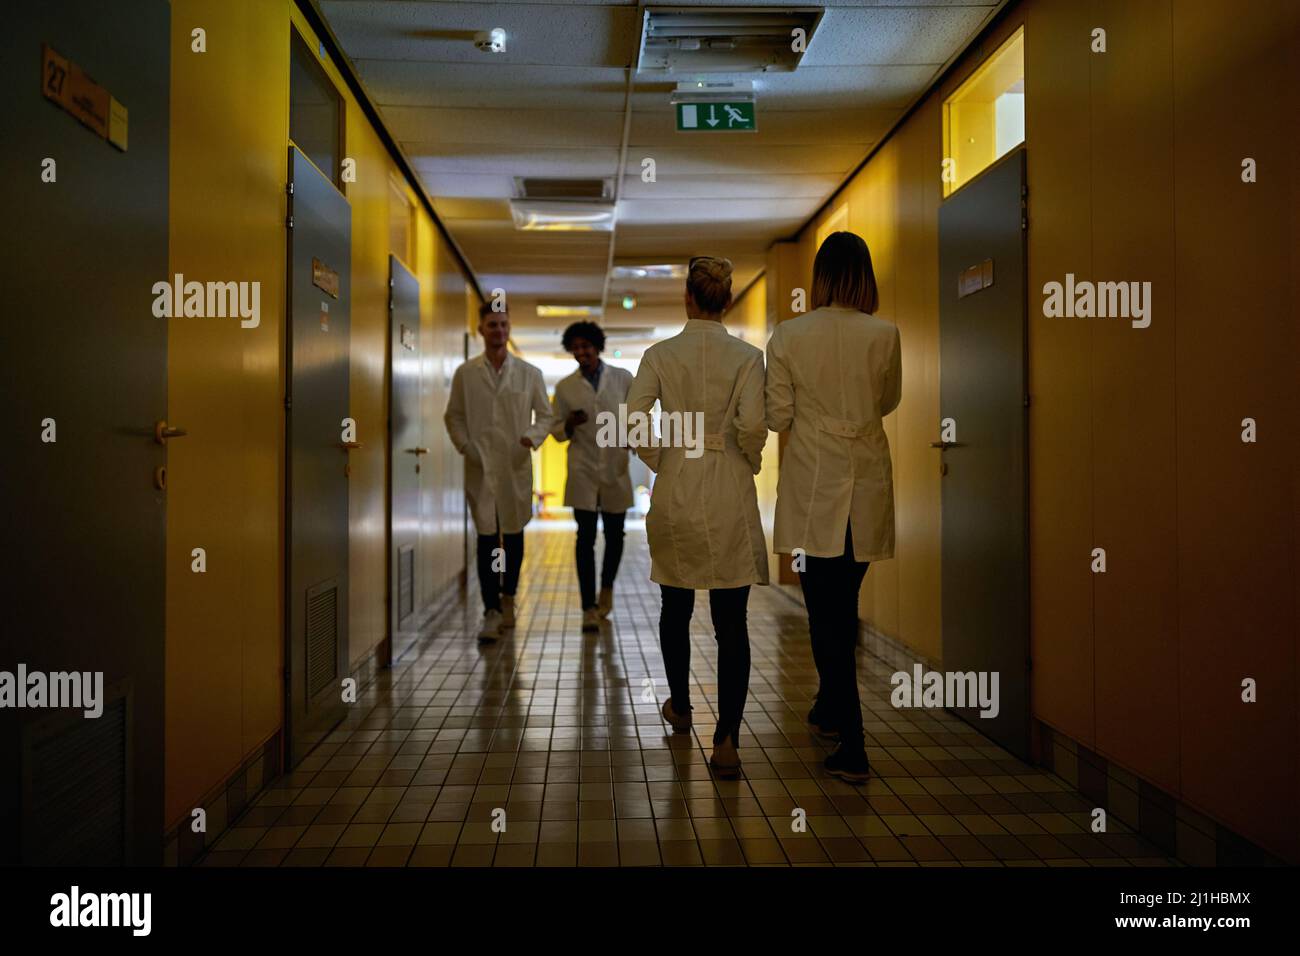 Young chemistry students walk down the dark and spooky hallway in the university building. Institution, hallway, university, people Stock Photo